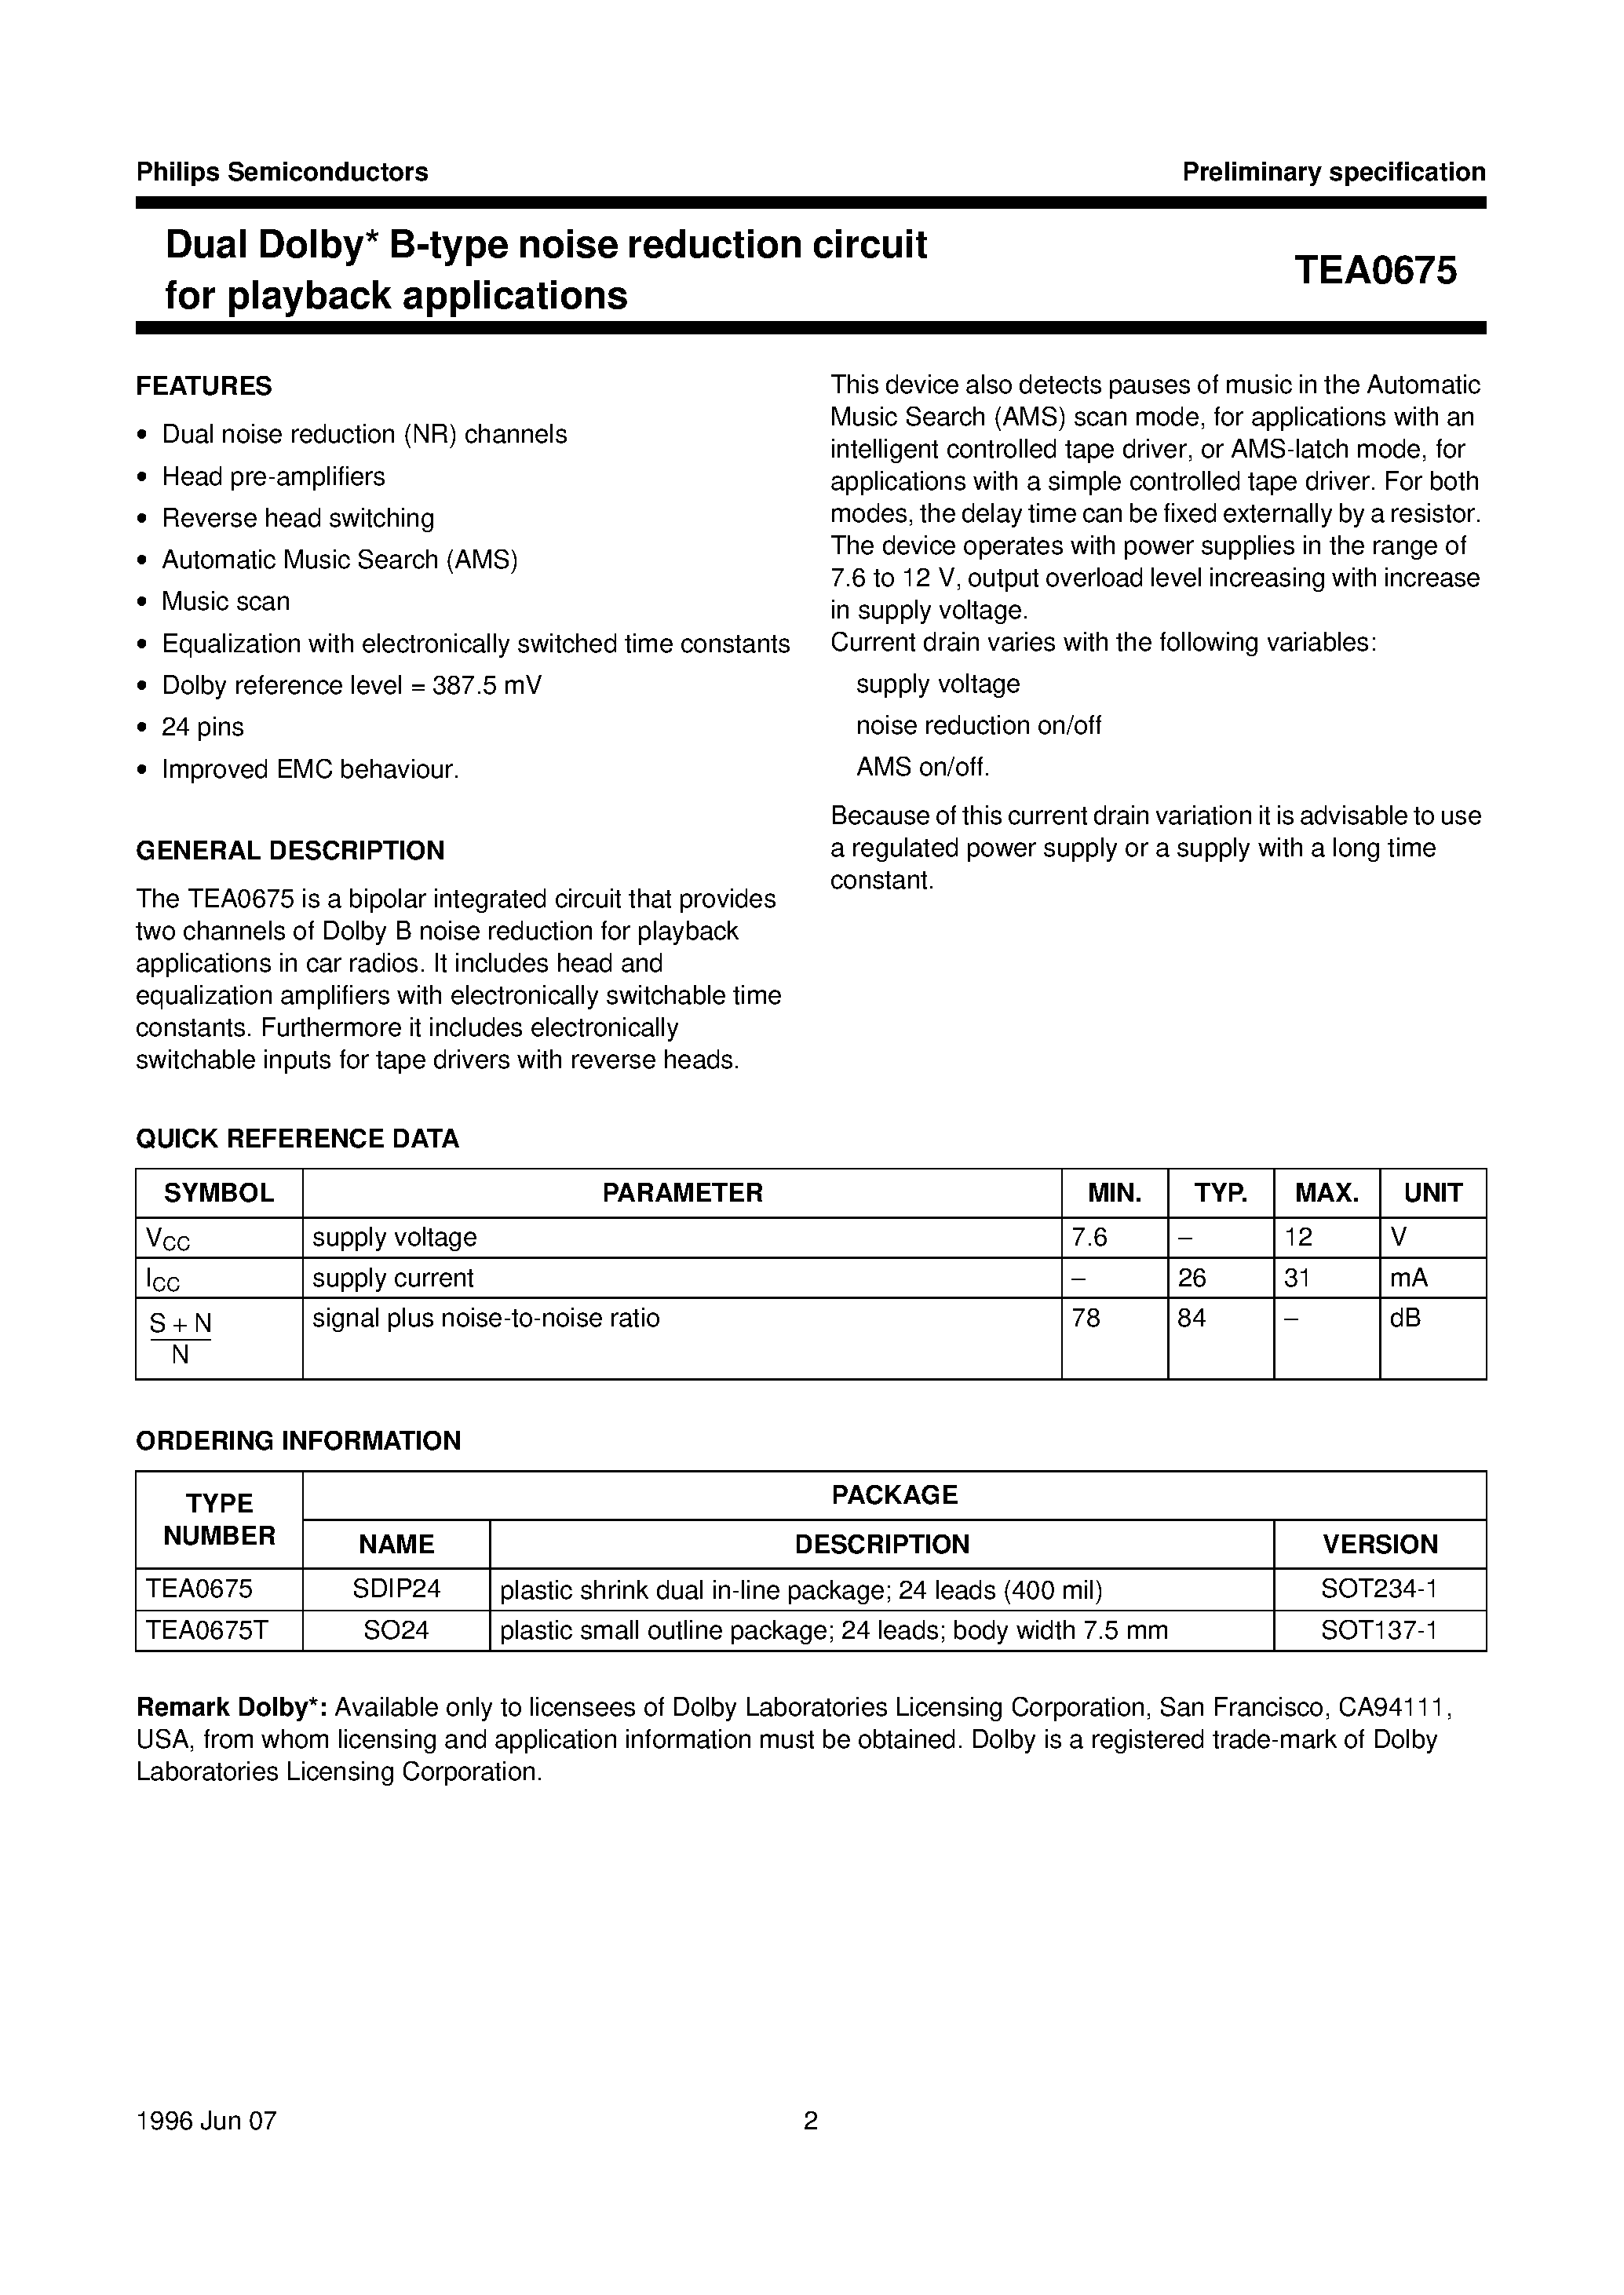 Datasheet TEA0675 - Dual Dolby* B-type noise reduction circuit for playback applications page 2